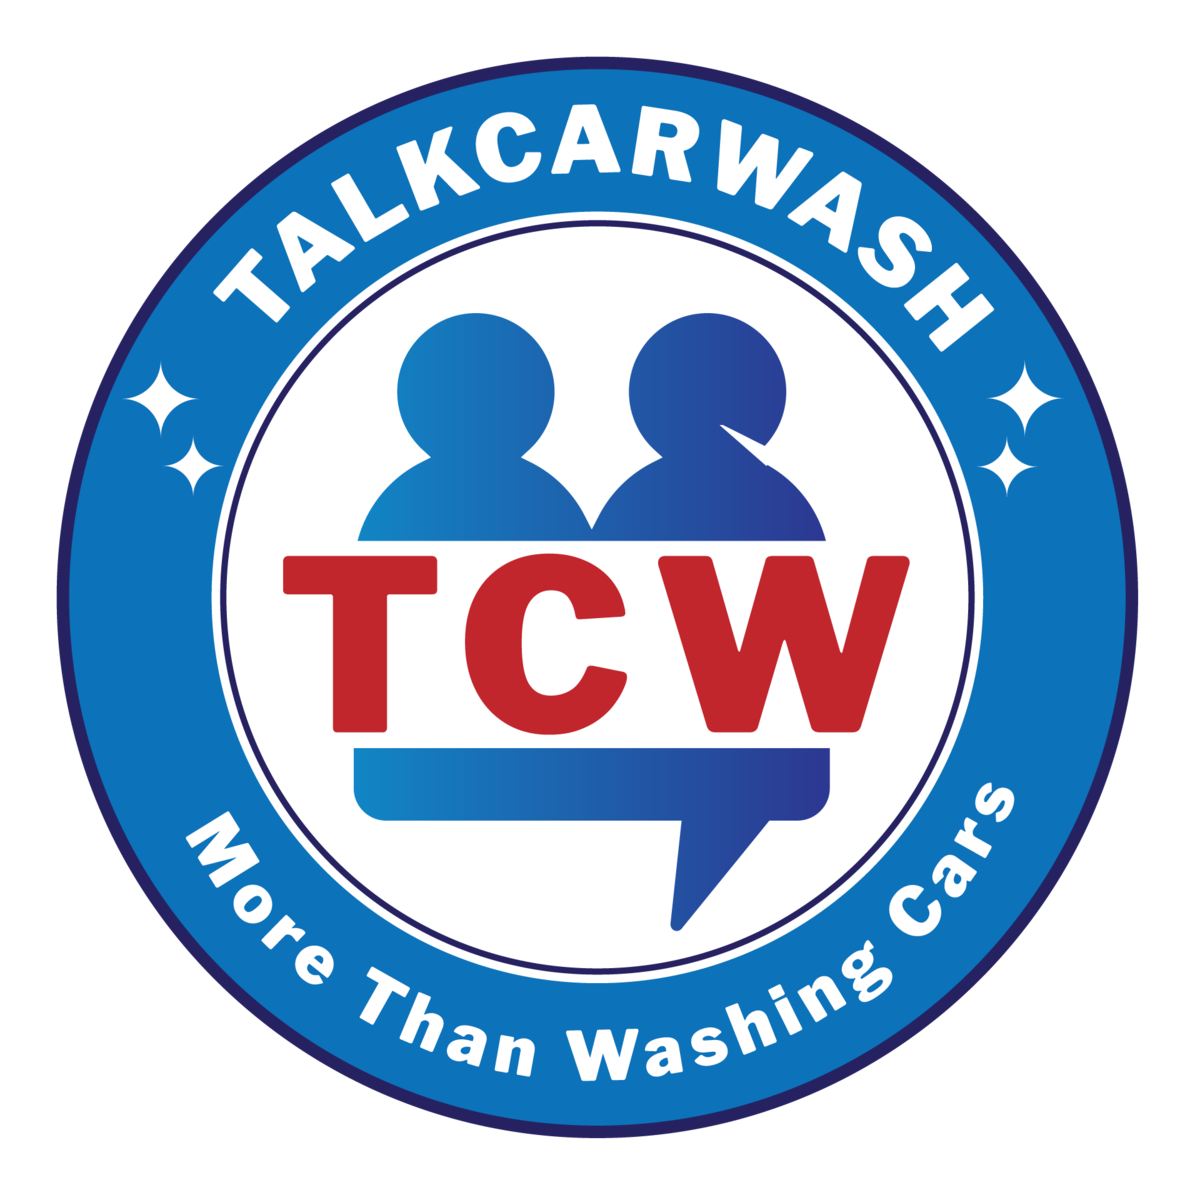 talk carwash logo get a grpahics package from OhmCo